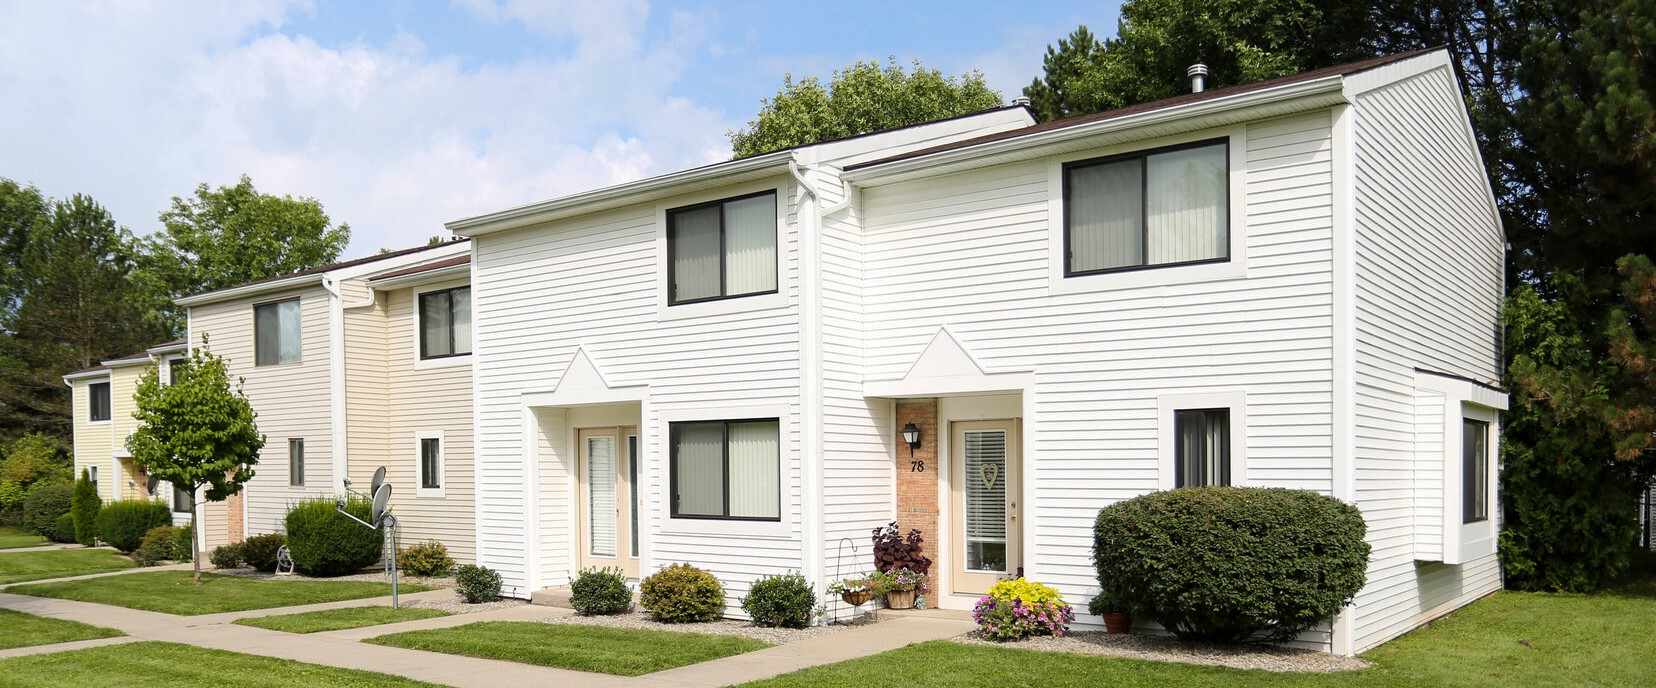 1, 2, and 3-bedroom Apartments for Rent in Penfield, NY